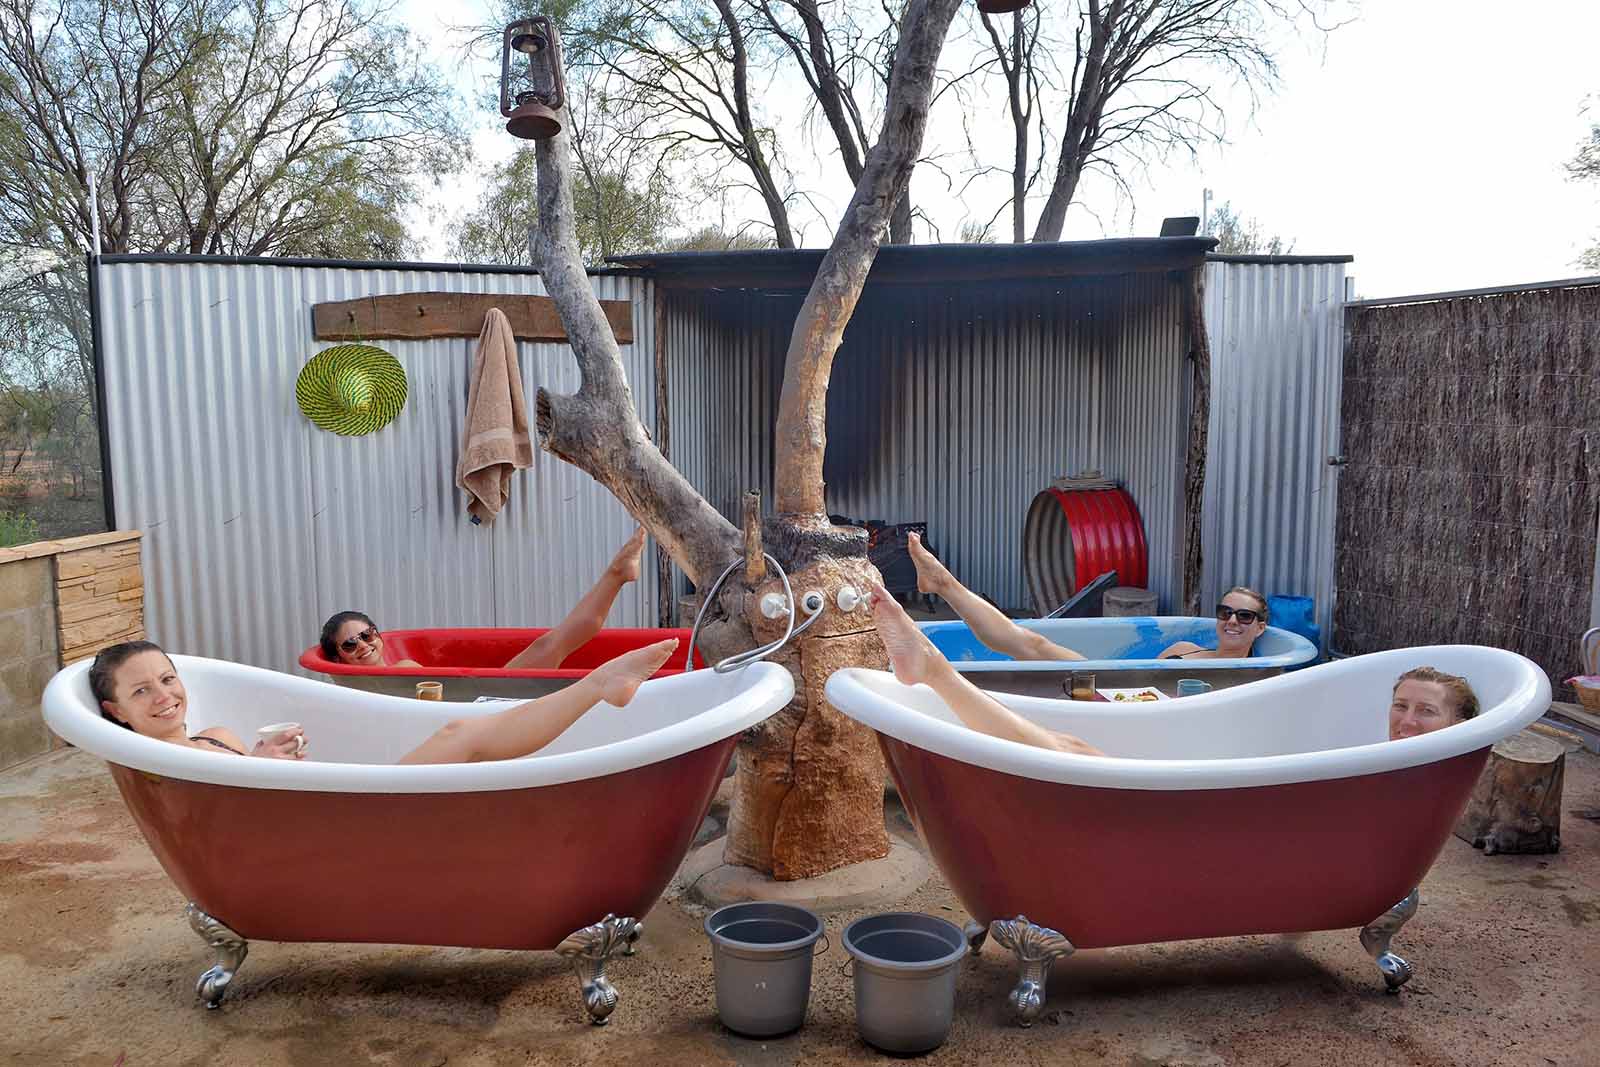 Mud bathing at Eulo, Outback Queensland | Epic Outback Guide